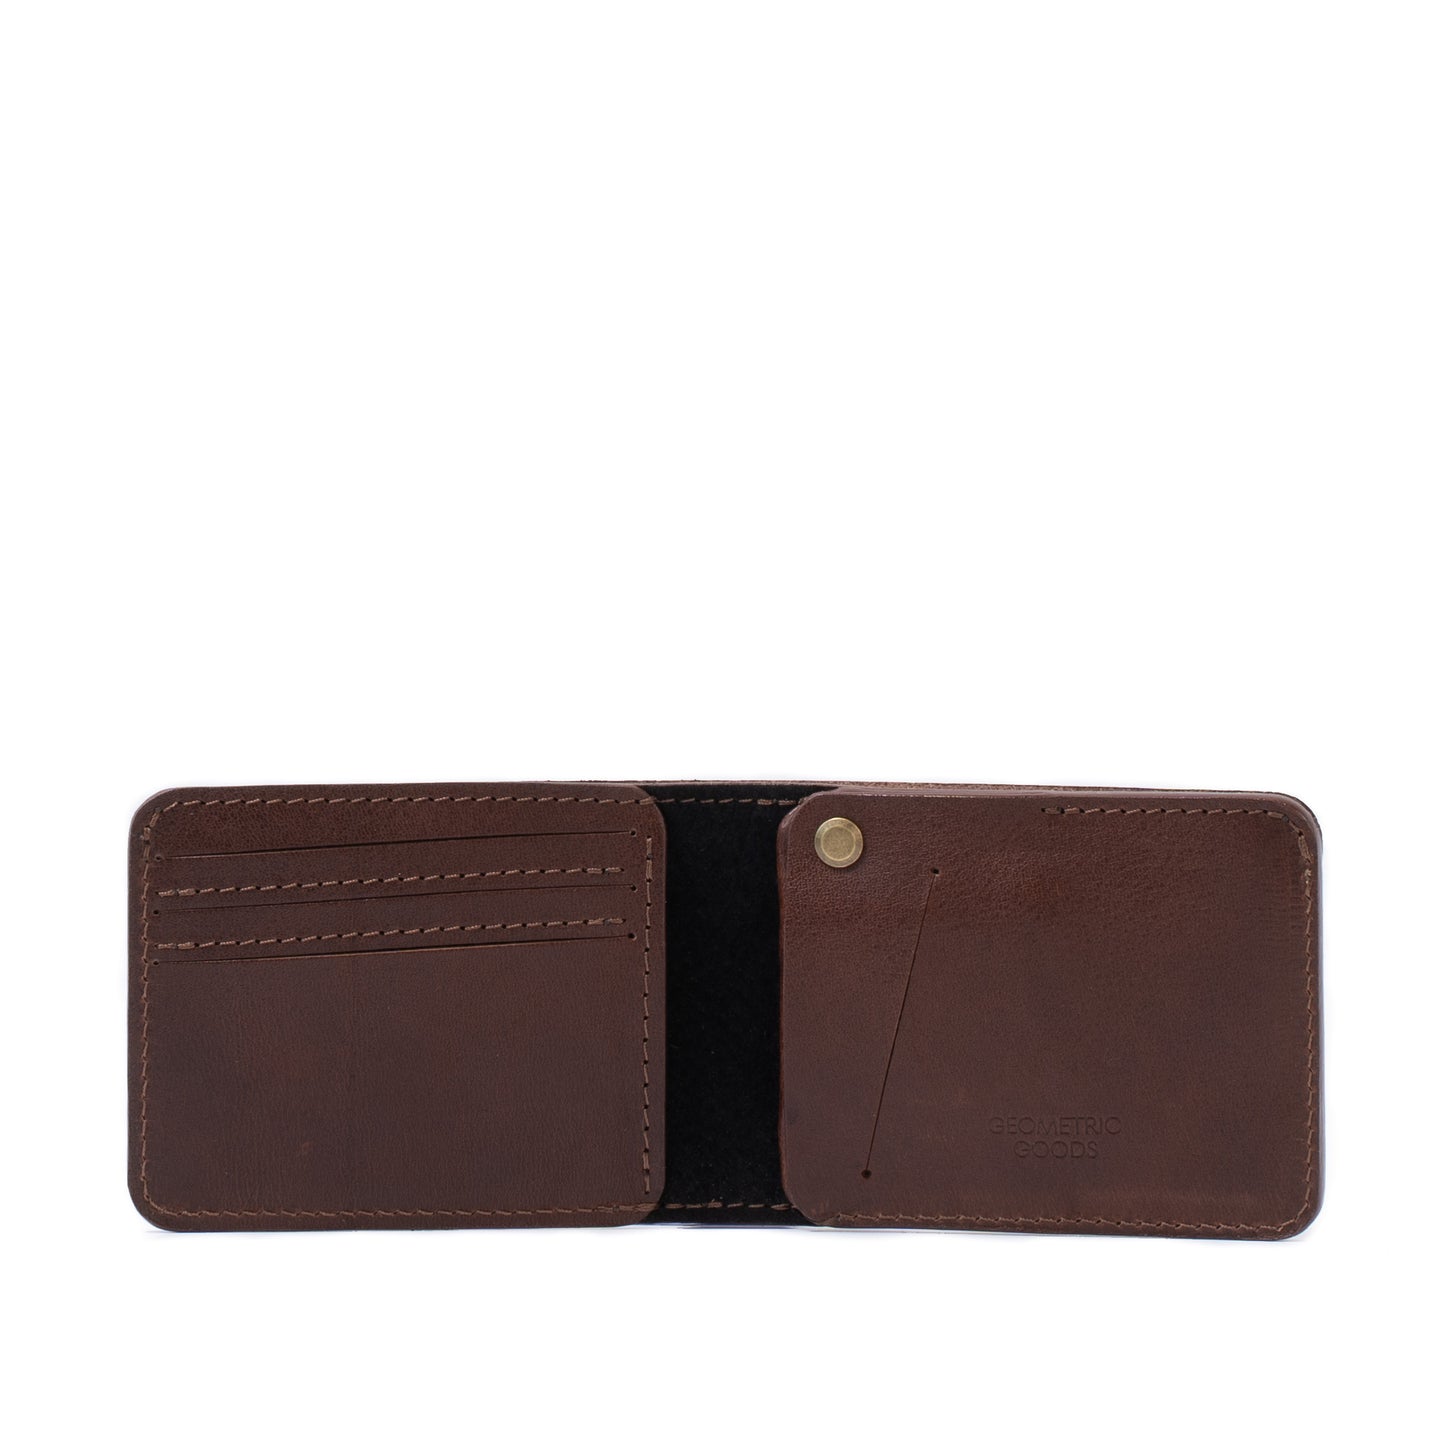 Mahogany dark brown full-grain Italian leather AirTag wallet billfold with hidden slot for tracking, combining luxury and security.